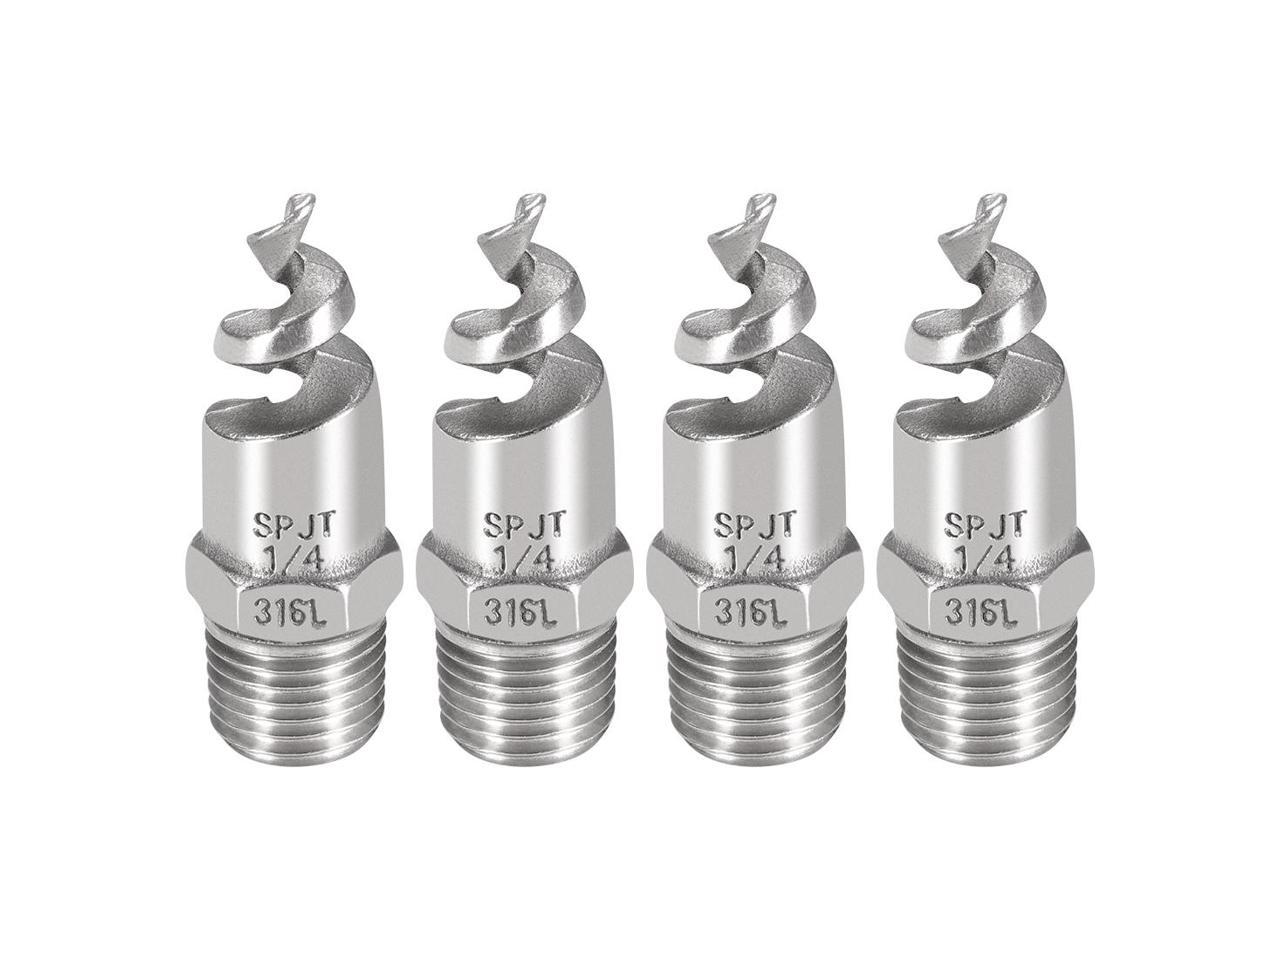 10 pcs New SPJT 316L Stainless Steel Spiral Cone Spray Nozzle 1/4 " BSPT